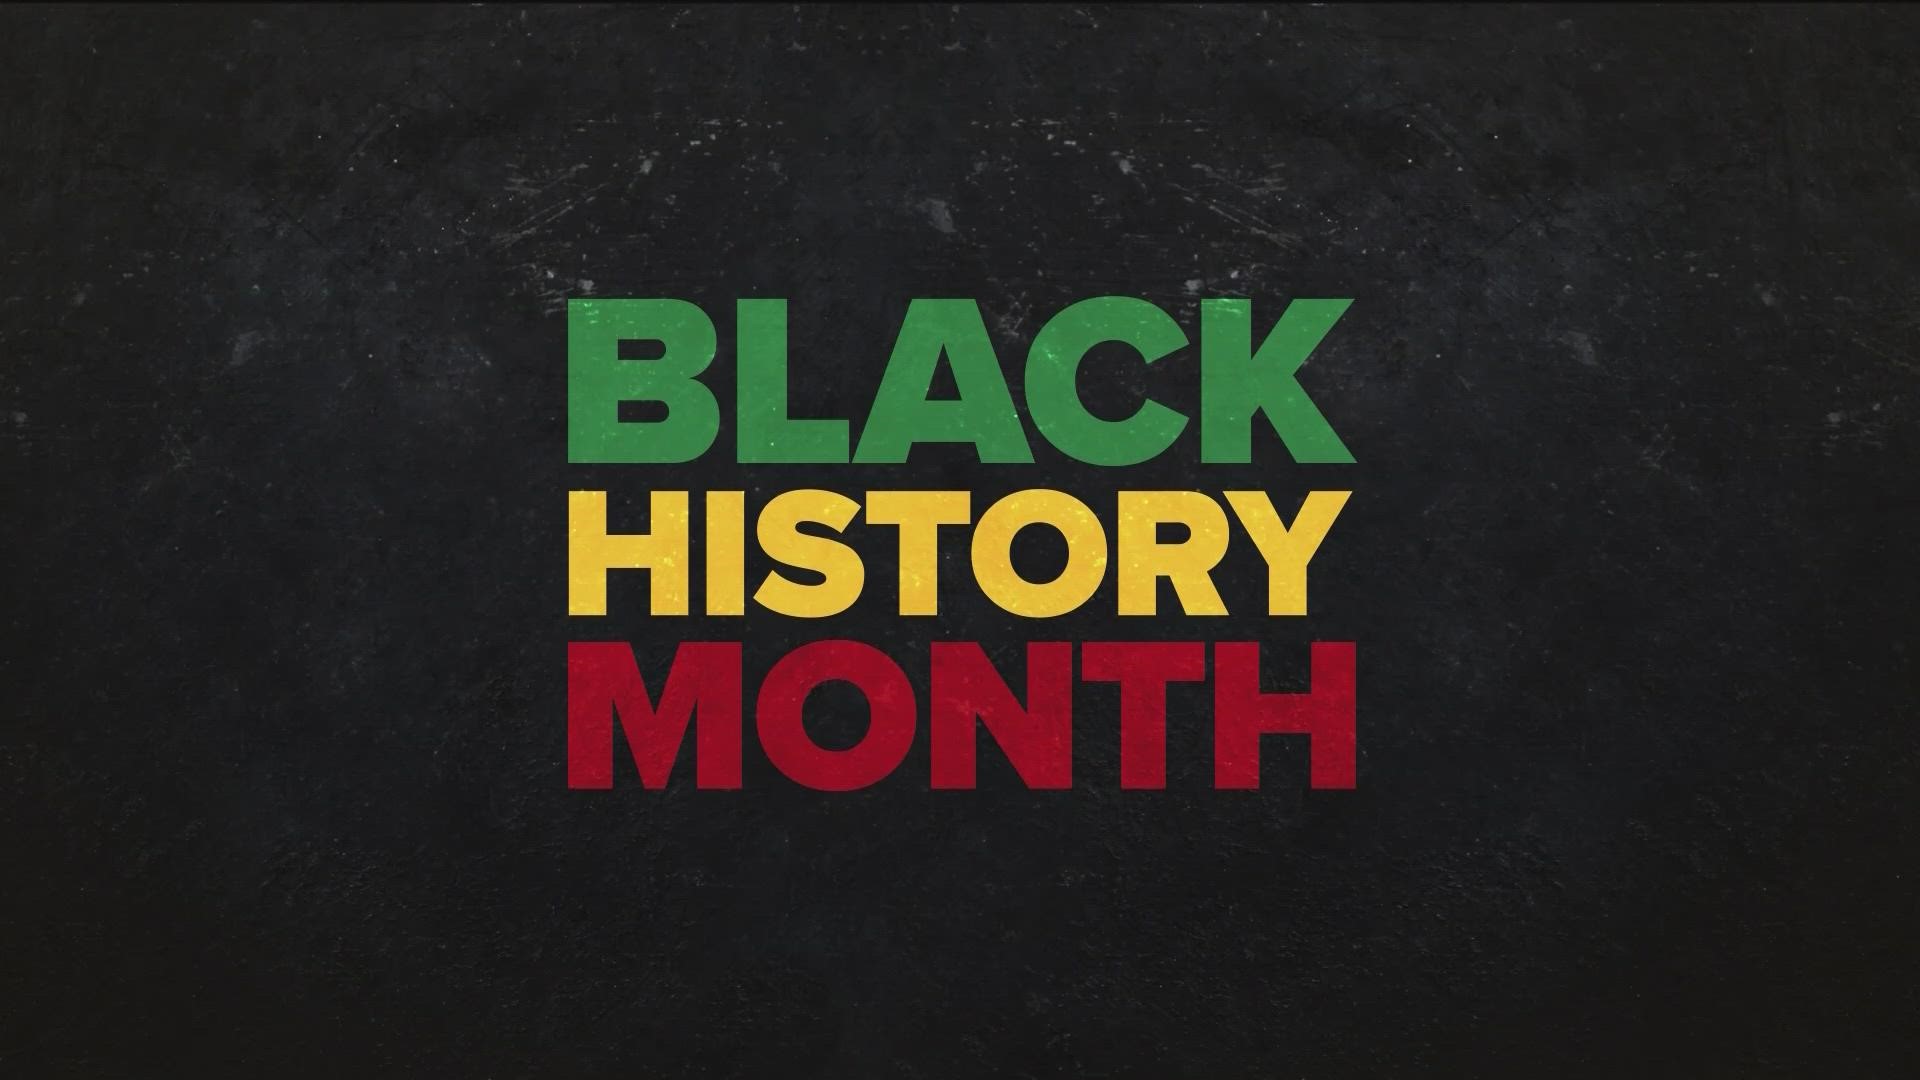 Black History Month is a celebration of all the accomplishments and contributions African-Americans have made for the U.S. But how did it get its start?